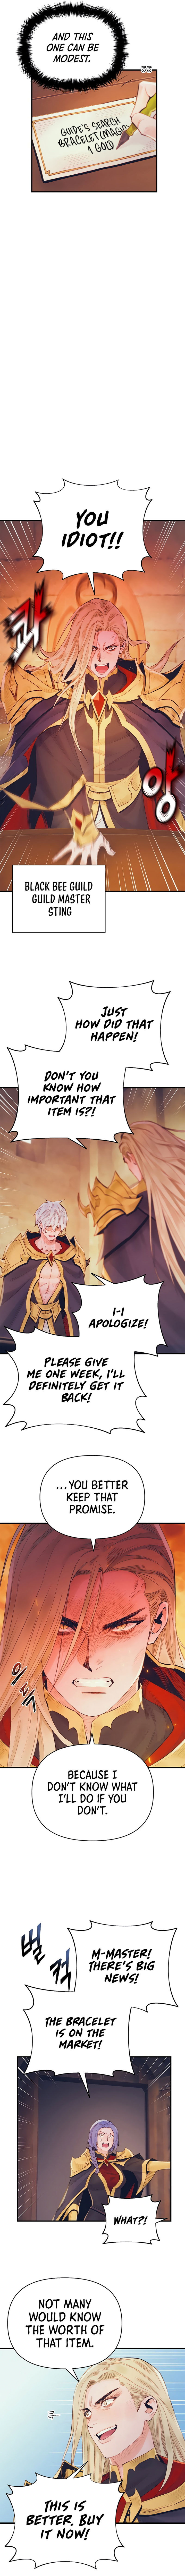 the-healing-priest-of-the-sun-chap-36-9